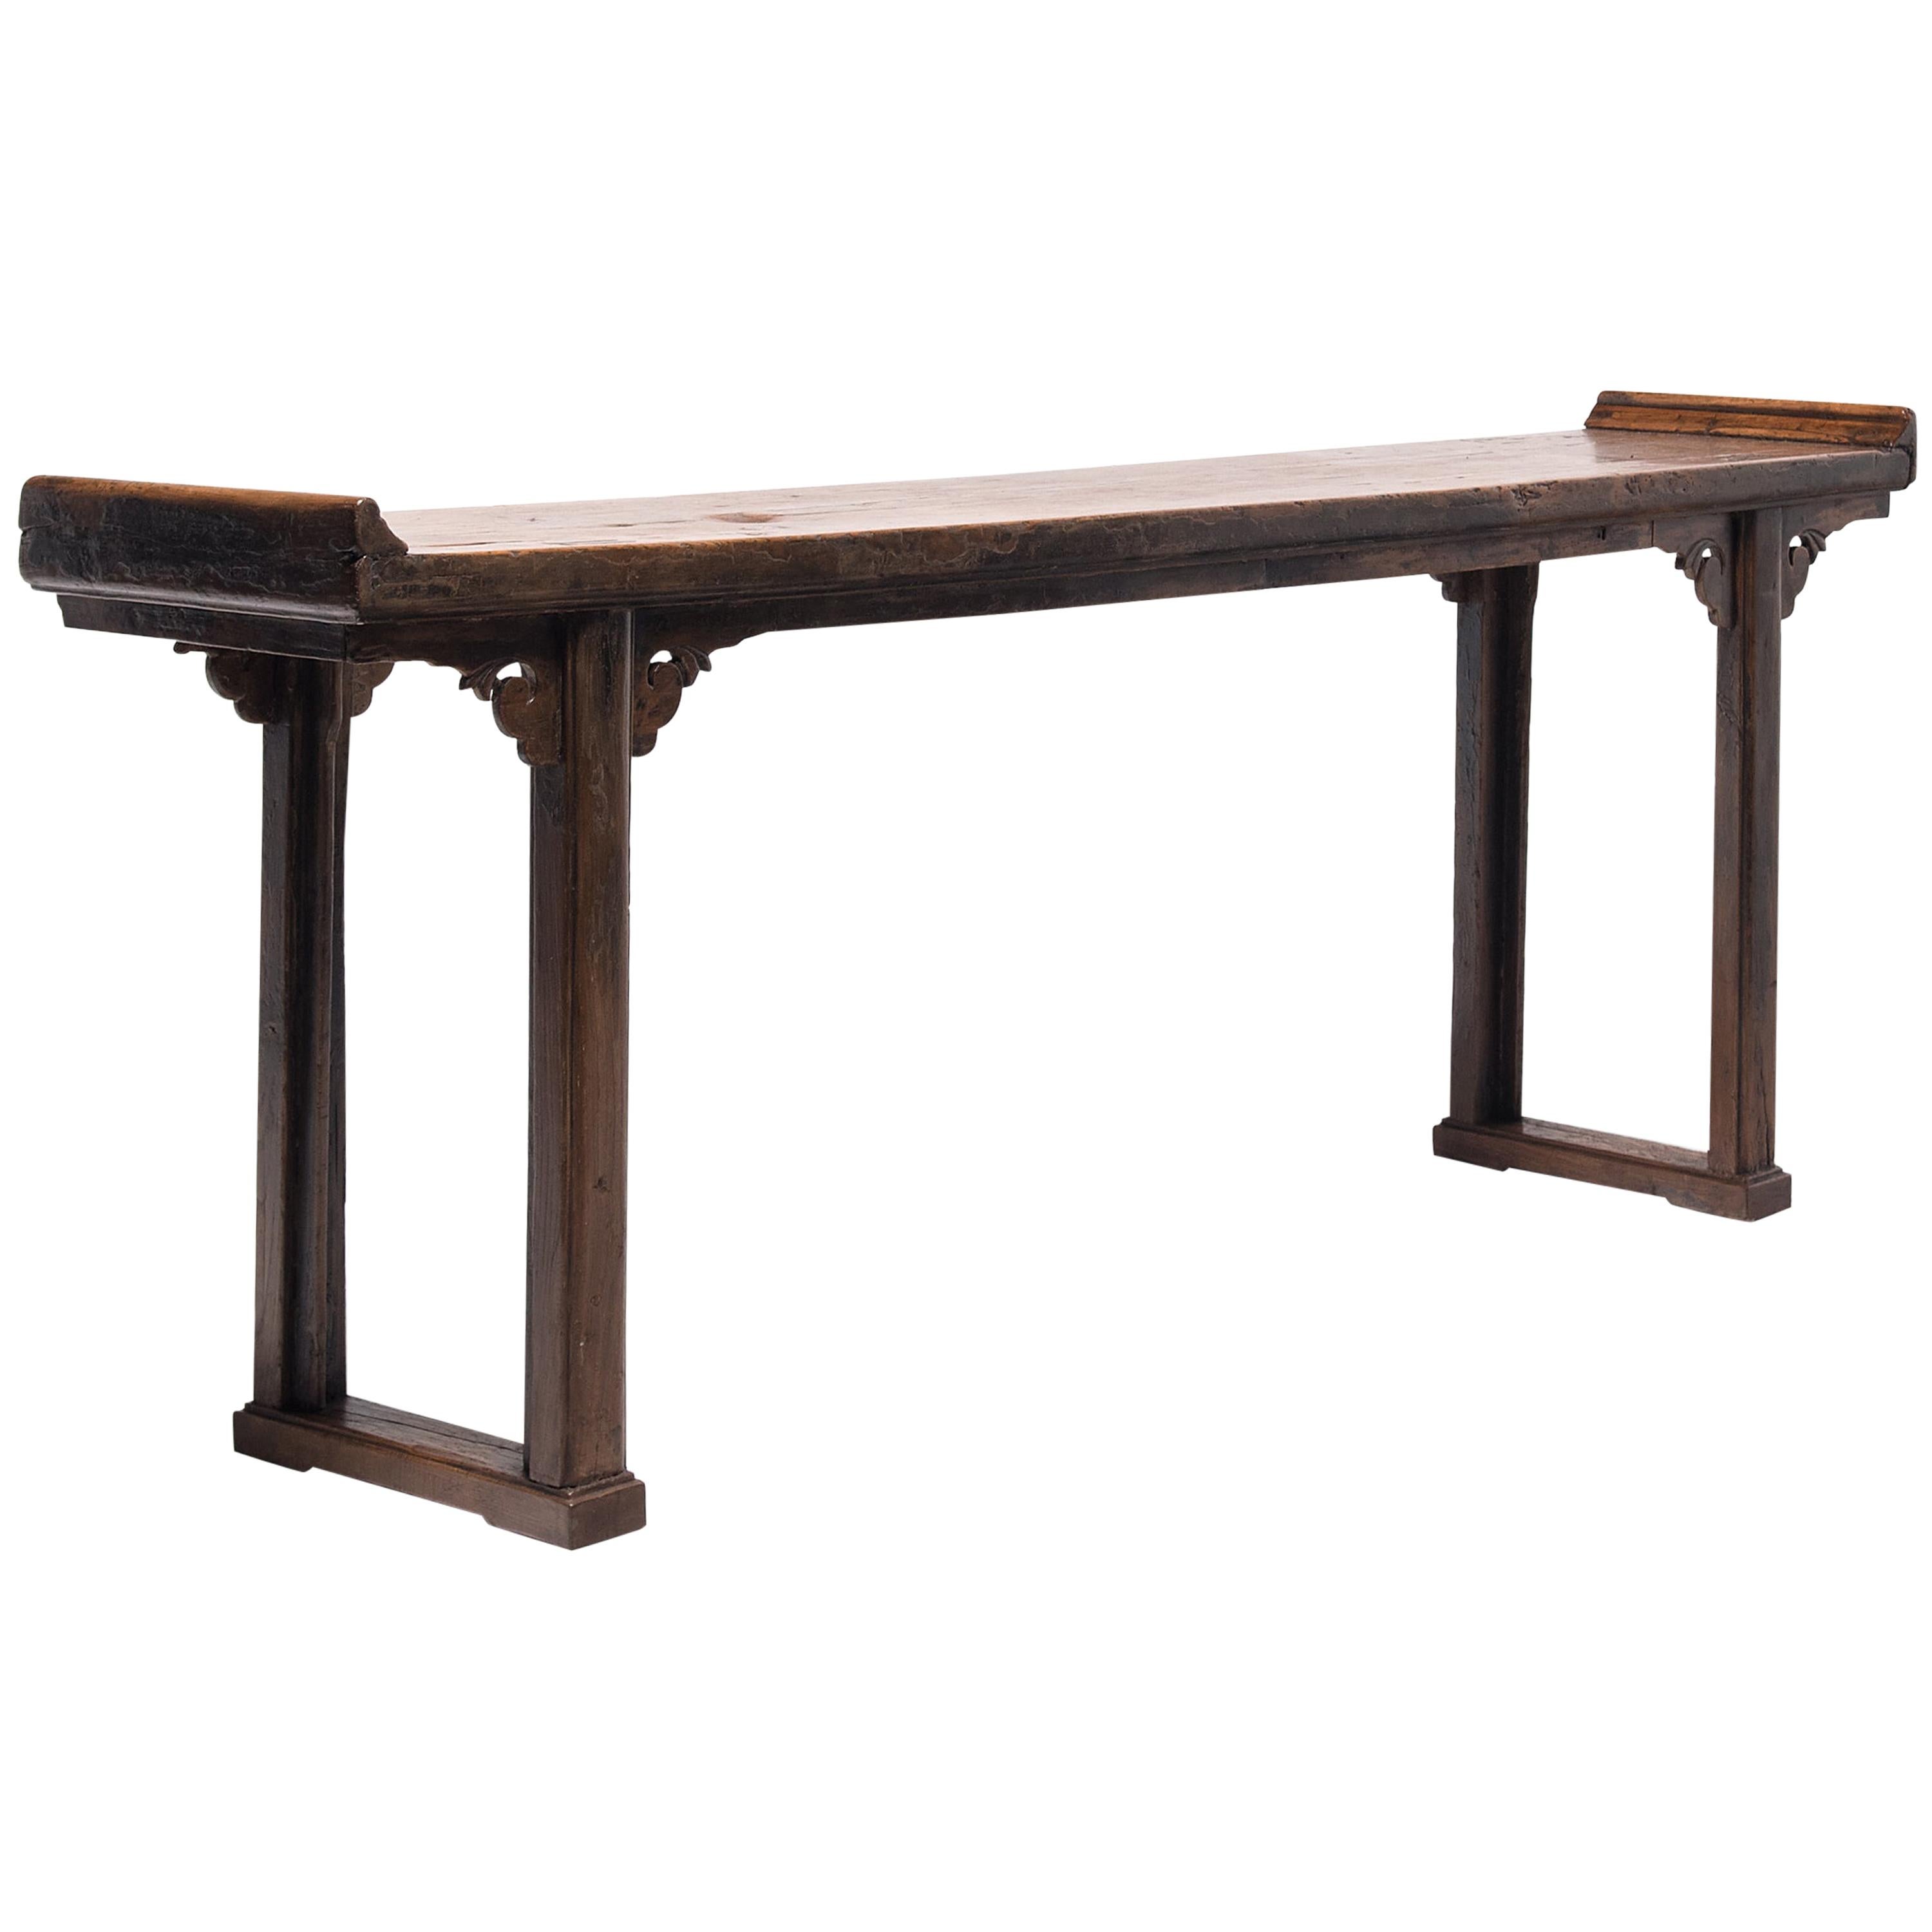 Chinese Plank Top Altar Table, circa 1800